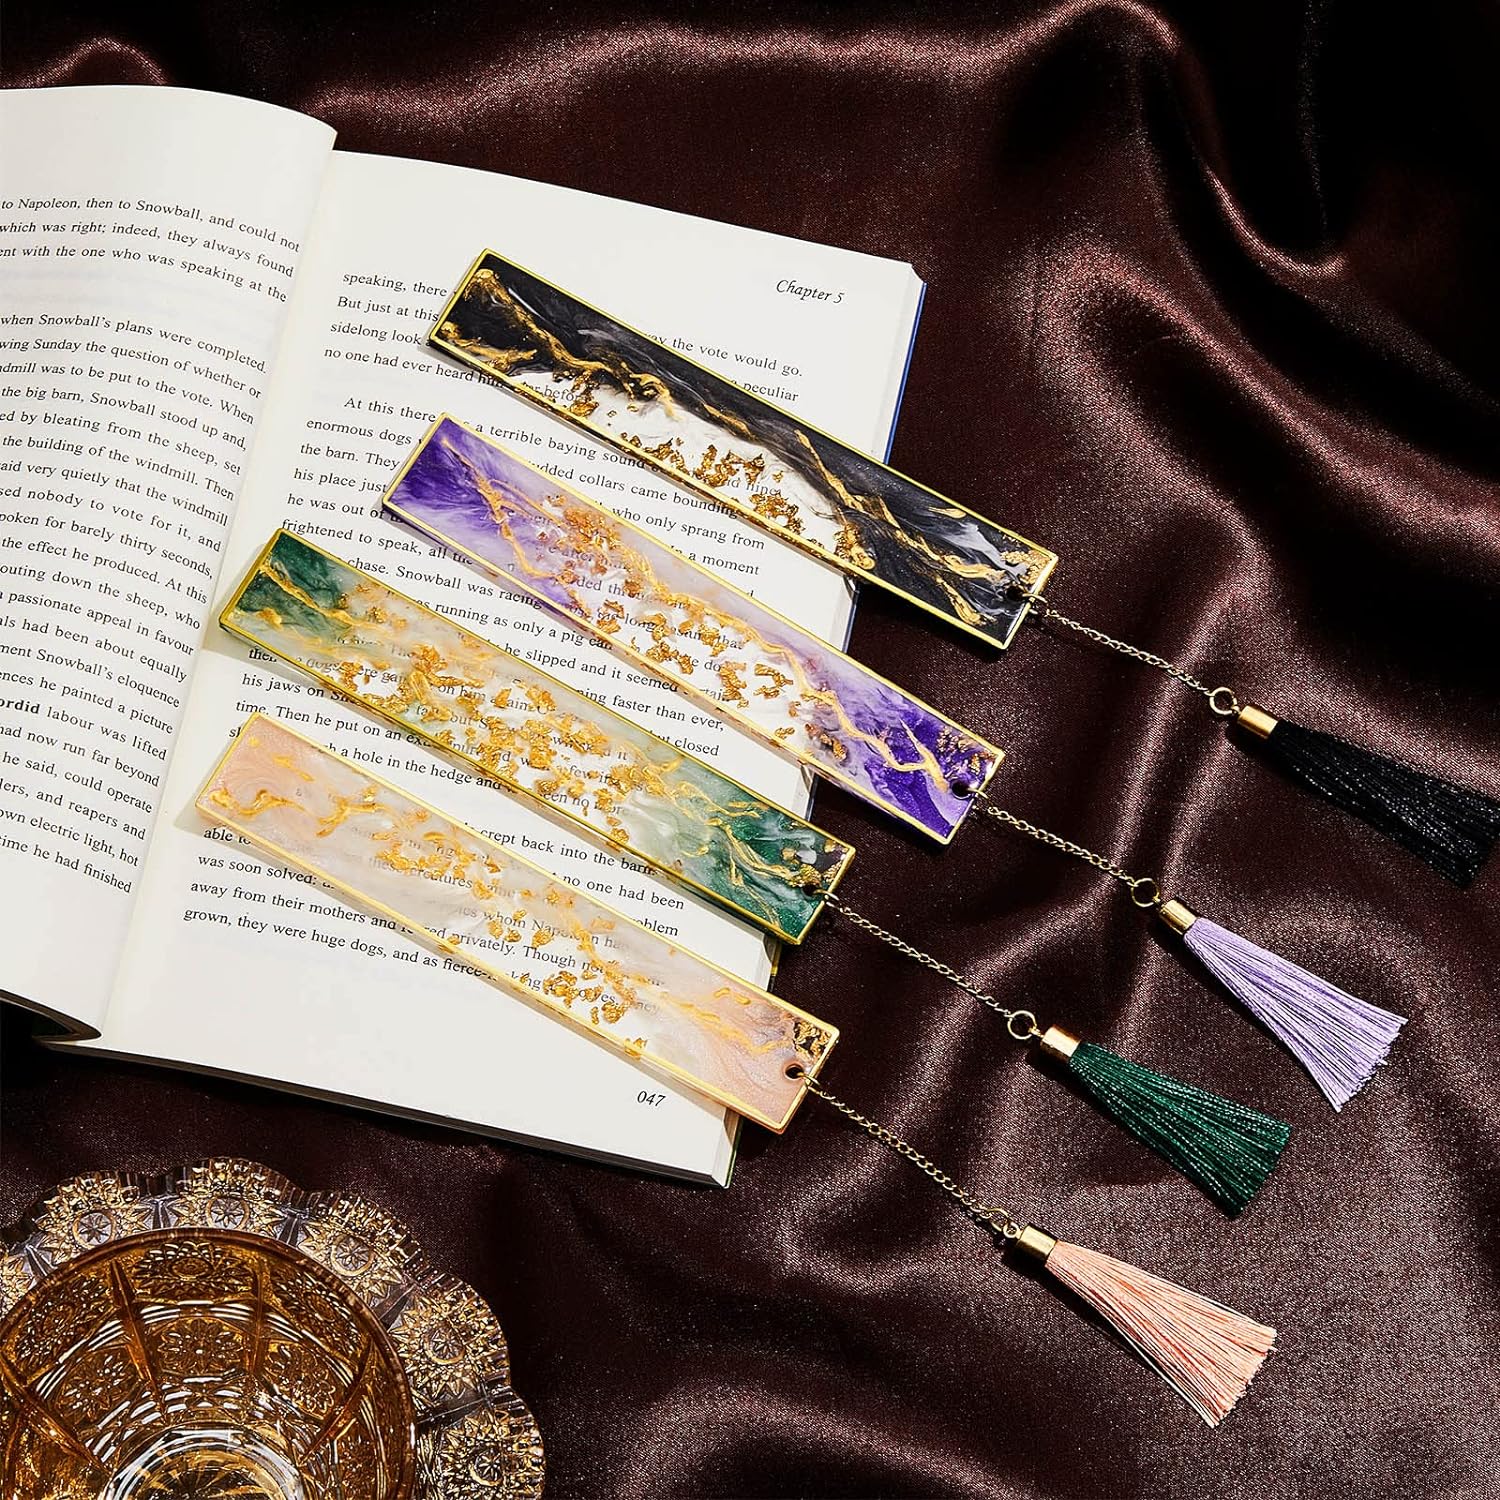 4Pcs Handmade Resin Bookmarks with Tassels